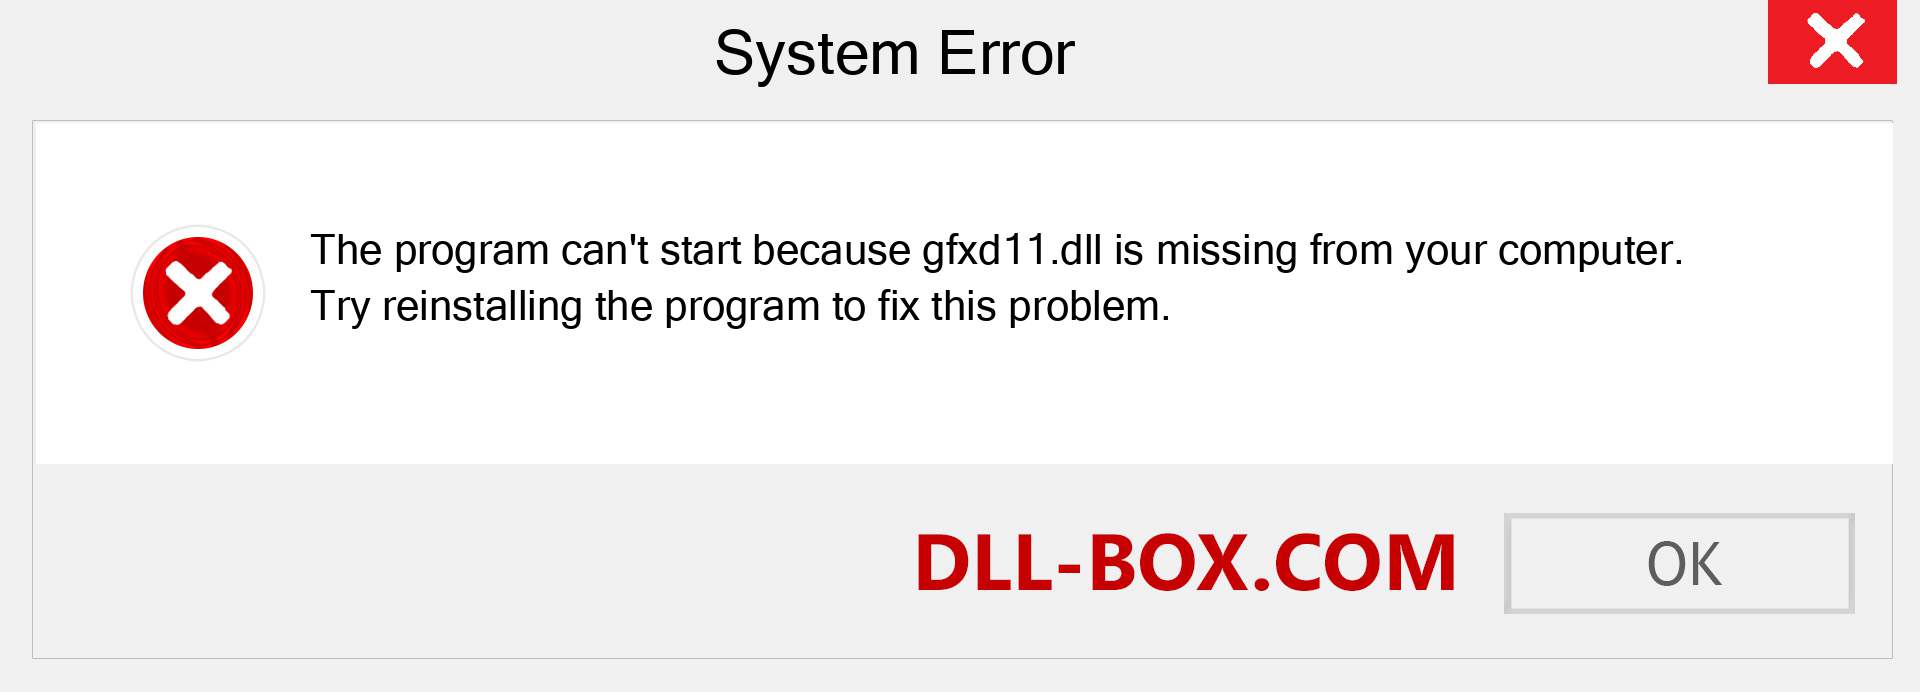  gfxd11.dll file is missing?. Download for Windows 7, 8, 10 - Fix  gfxd11 dll Missing Error on Windows, photos, images